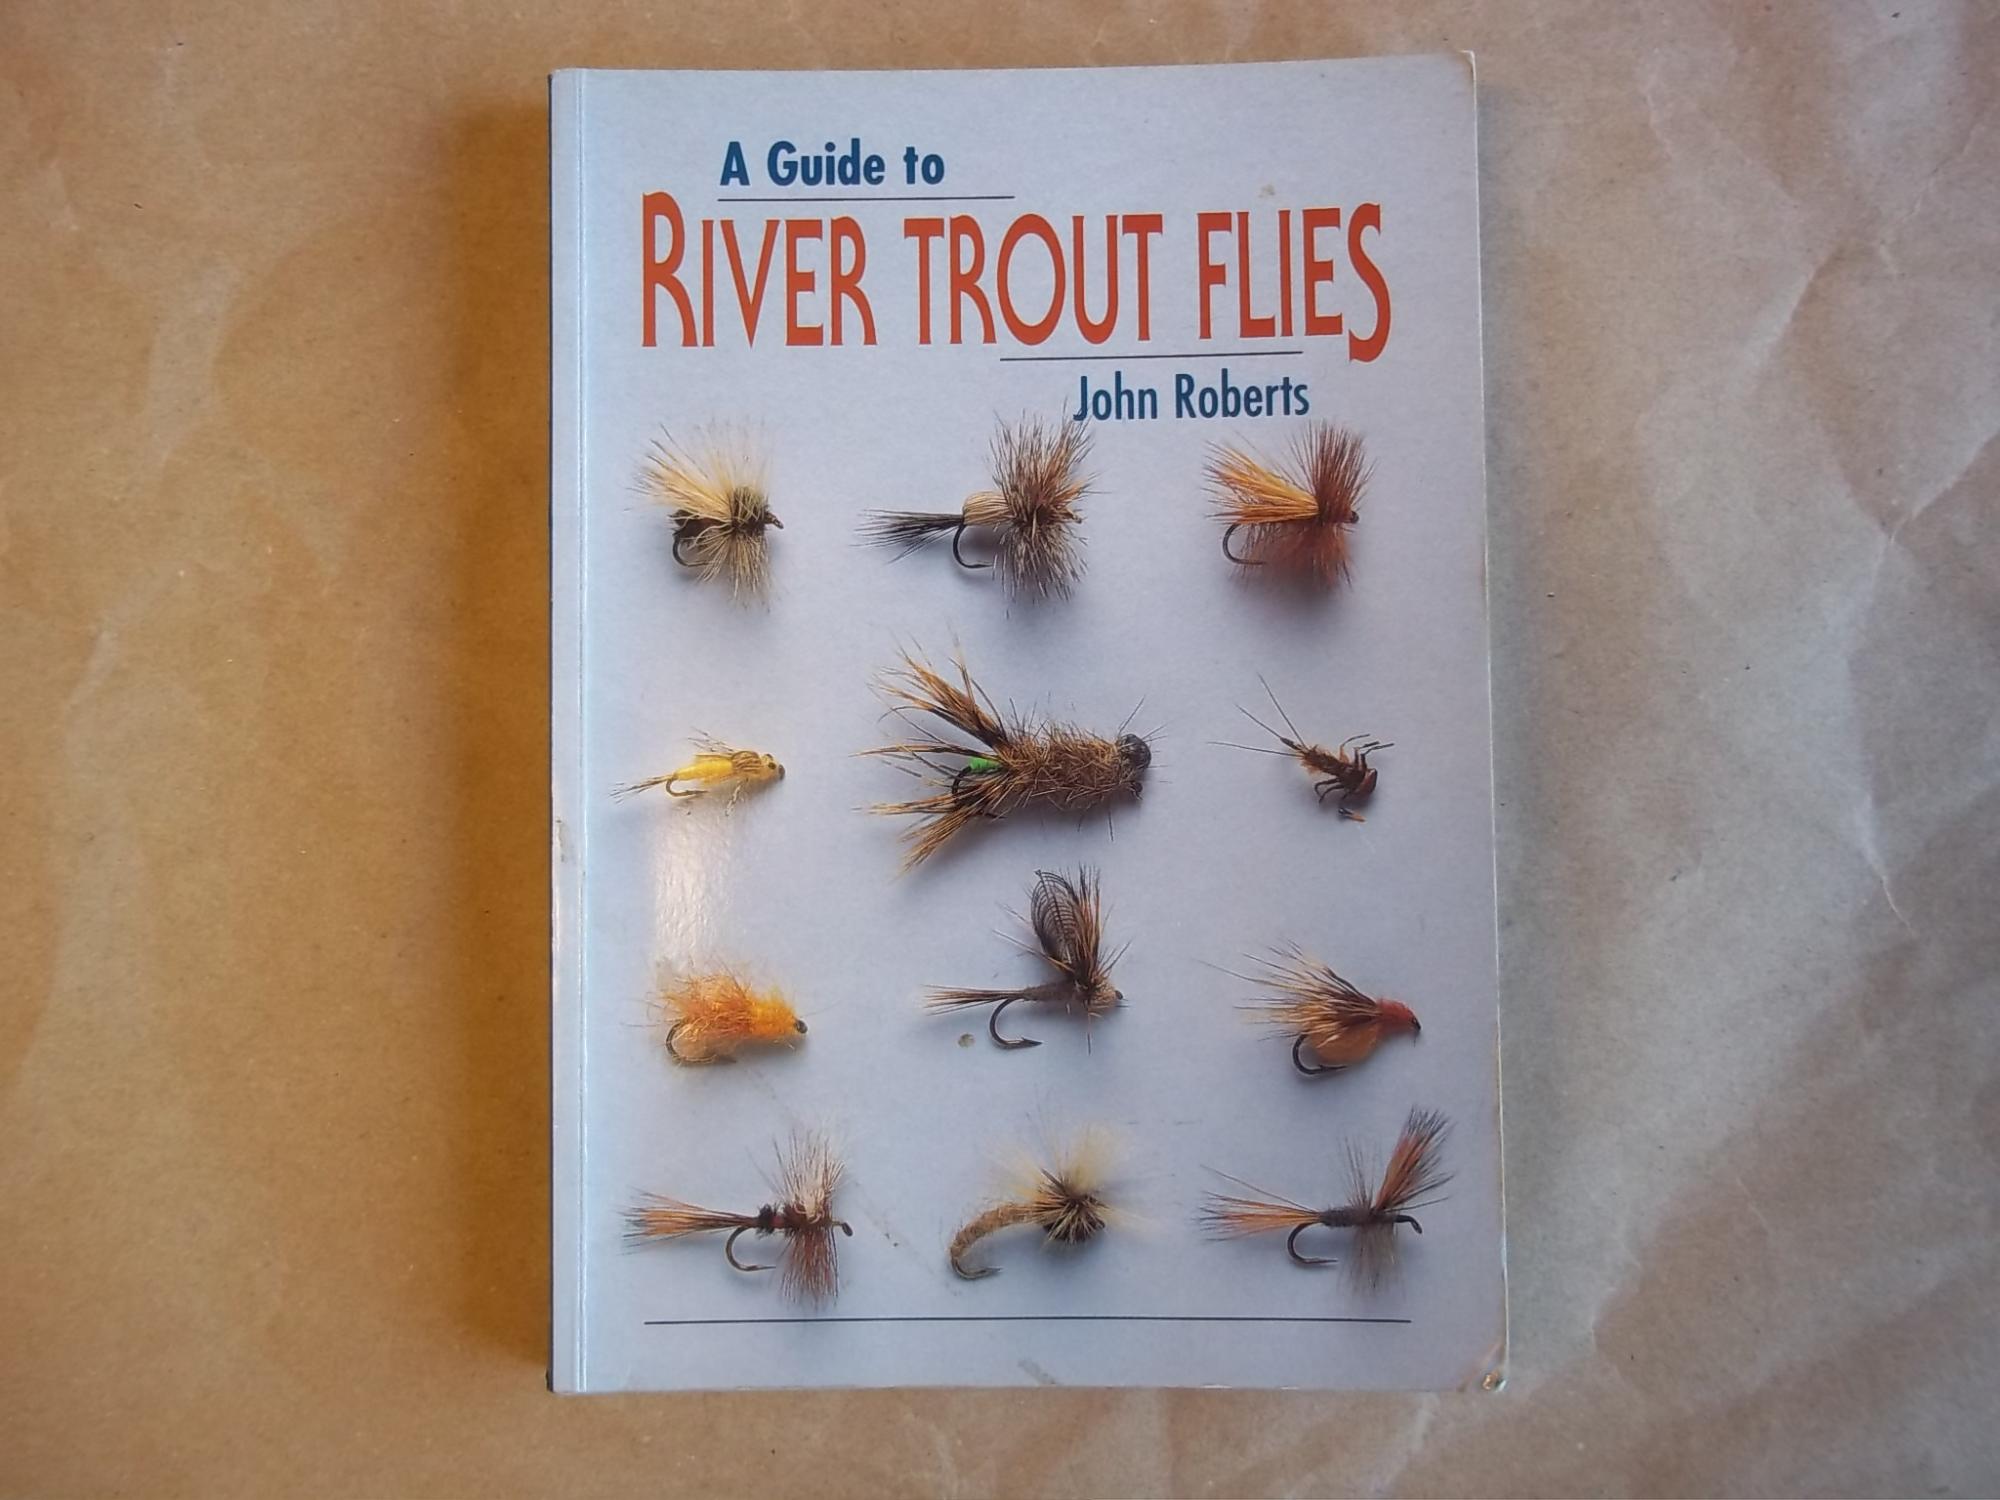 A Guide to River Trout Flies - John Roberts